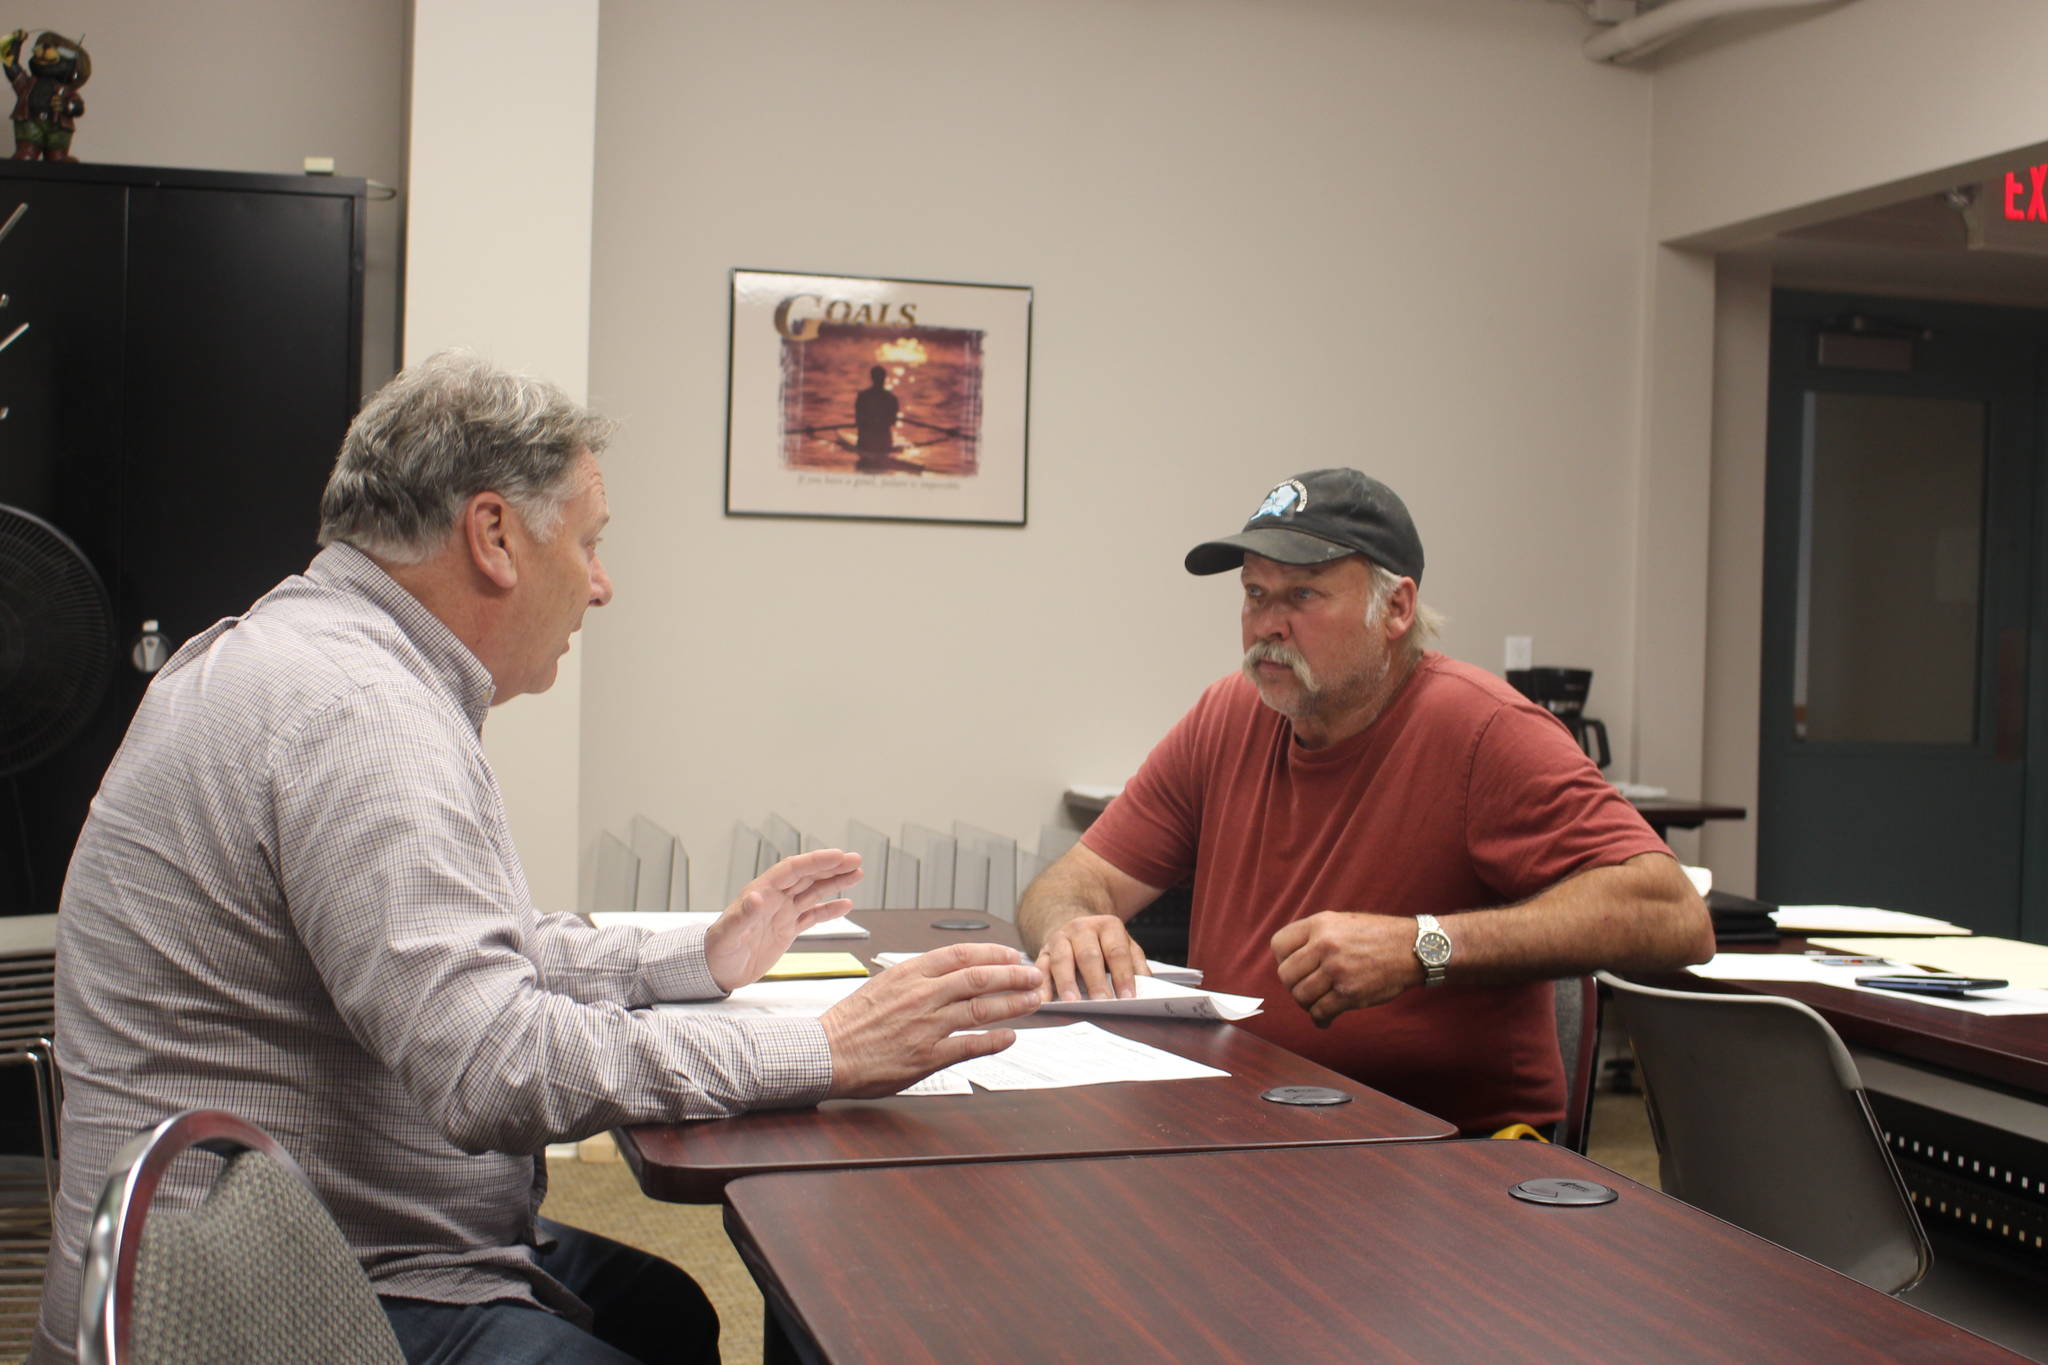 Tim Dillon, executive director of the Kenai Peninsula Economic Development District, helps Doug Weaver, owner of Northern Superior Construction, apply for an AK CARES grant through Credit Union 1 at the KPEDD office in Kenai, Alaska on July 1, 2020. (Photo by Brian Mazurek/Peninsula Clarion)